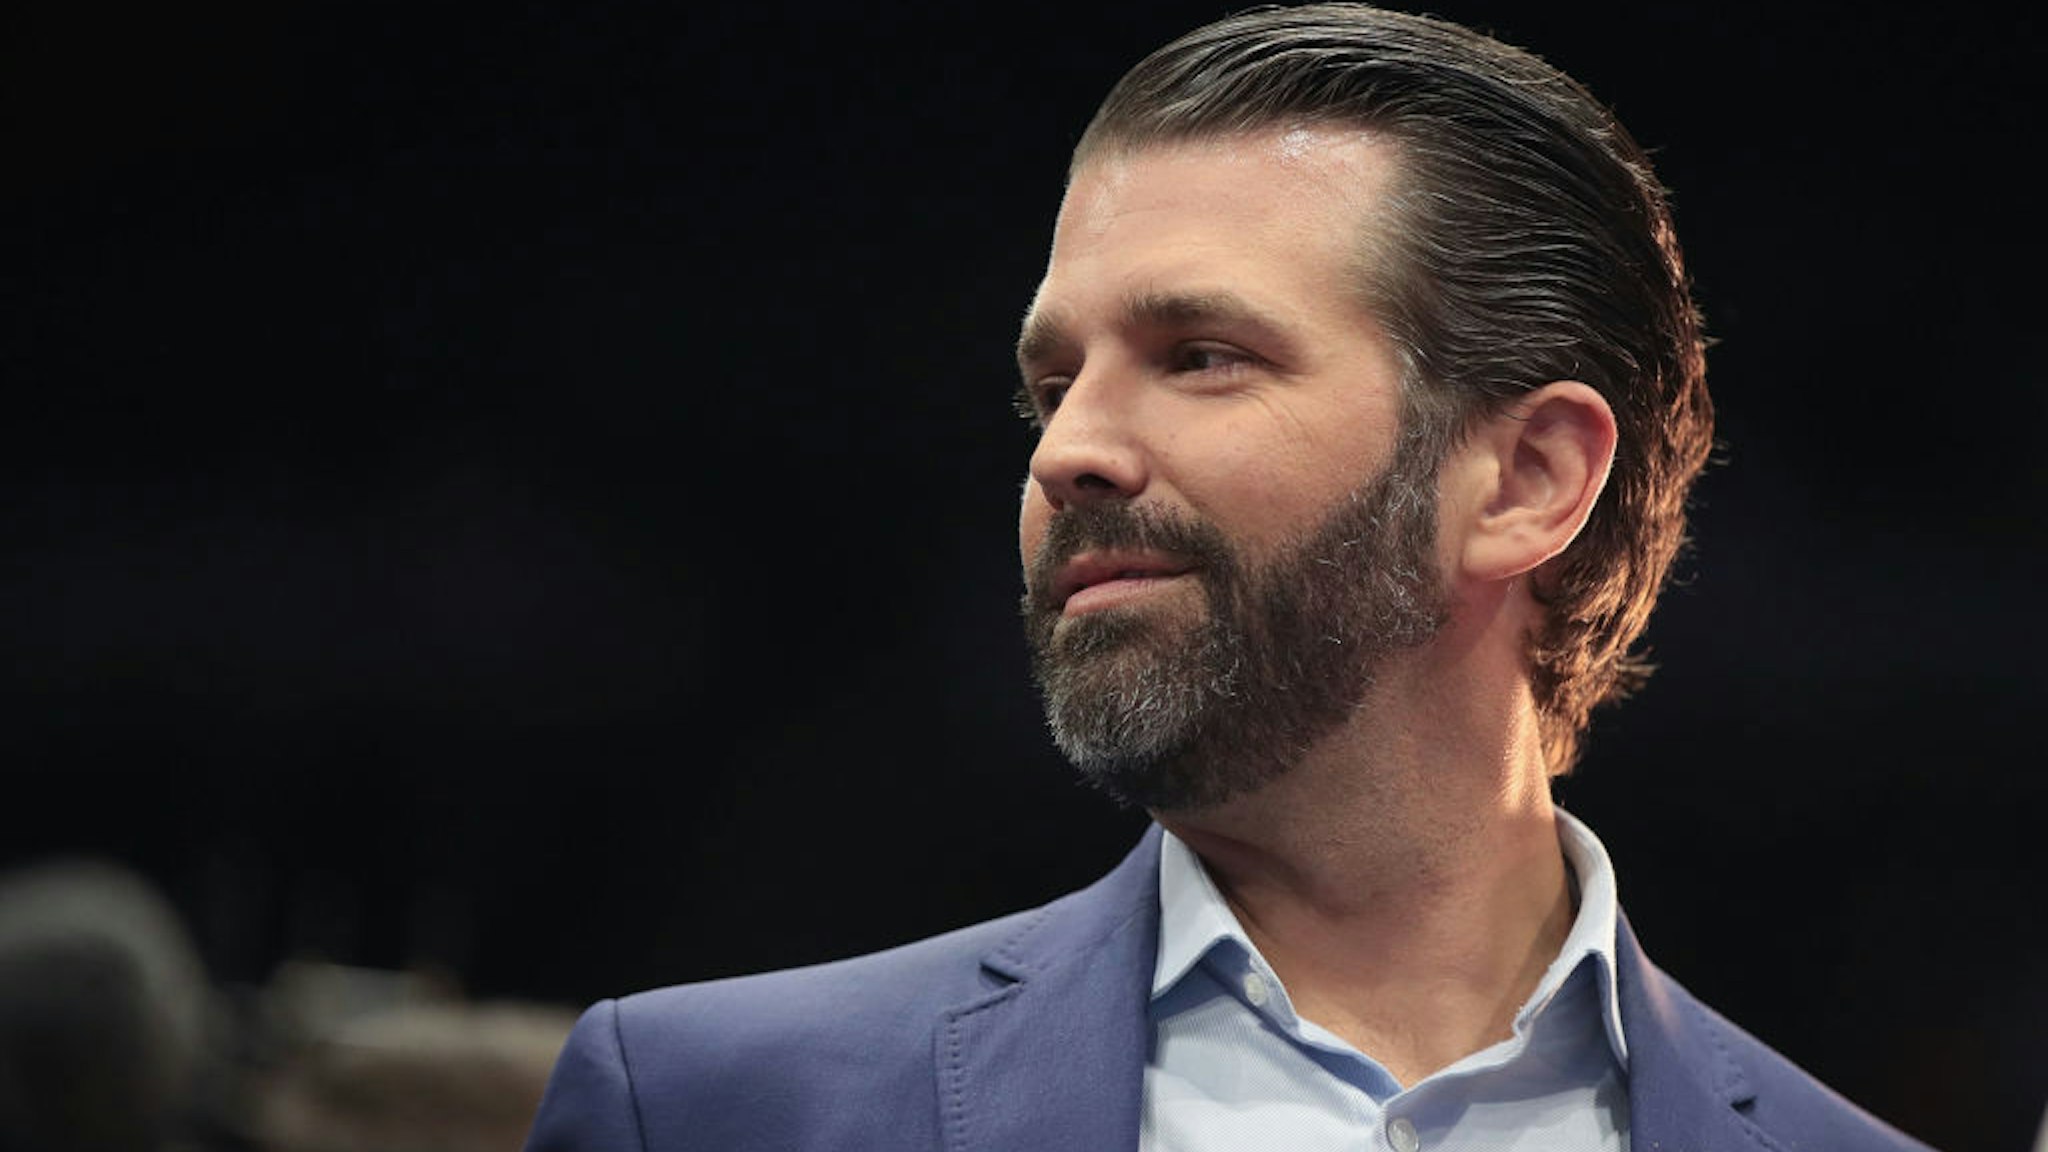 MARCH 28: Donald Trump Jr. talks to the press before the arrival of his father President Donald Trump during a rally at the Van Andel Arena on March 28, 2019 in Grand Rapids, Michigan. Grand Rapids was the final city Trump visited during his 2016 campaign.